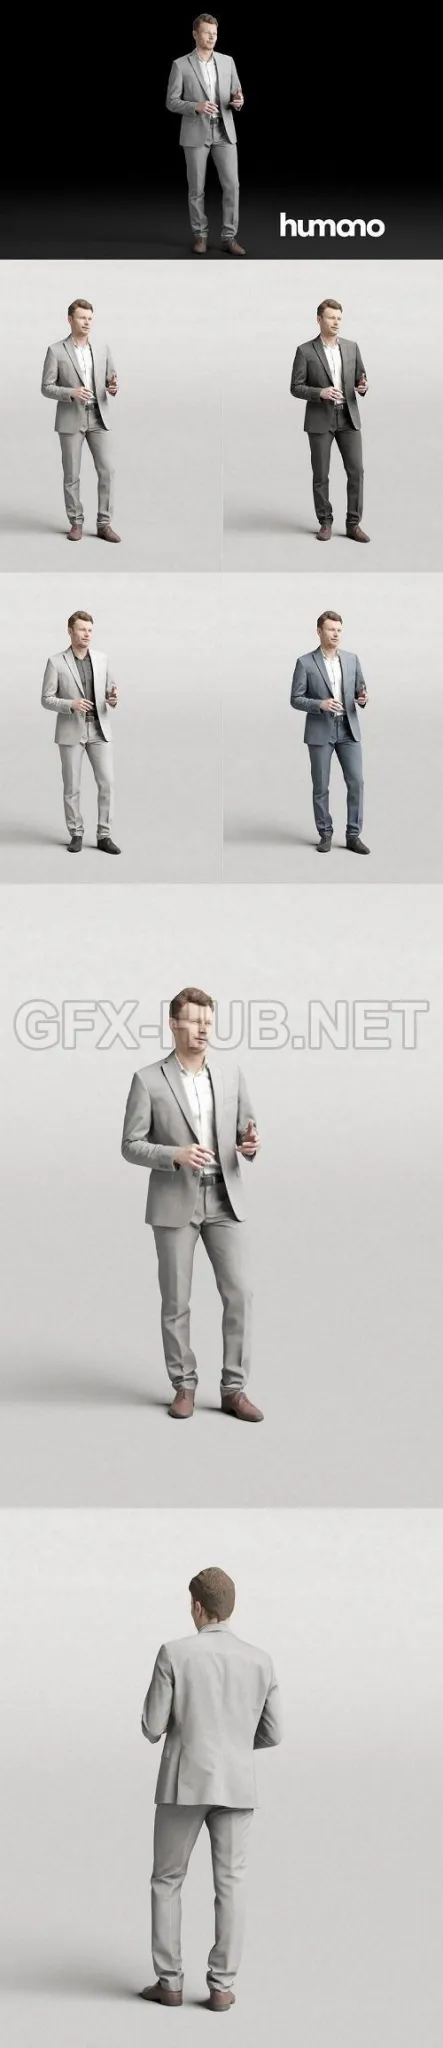 PBR Game 3D Model – Elegant man in suit standing and talking 0313